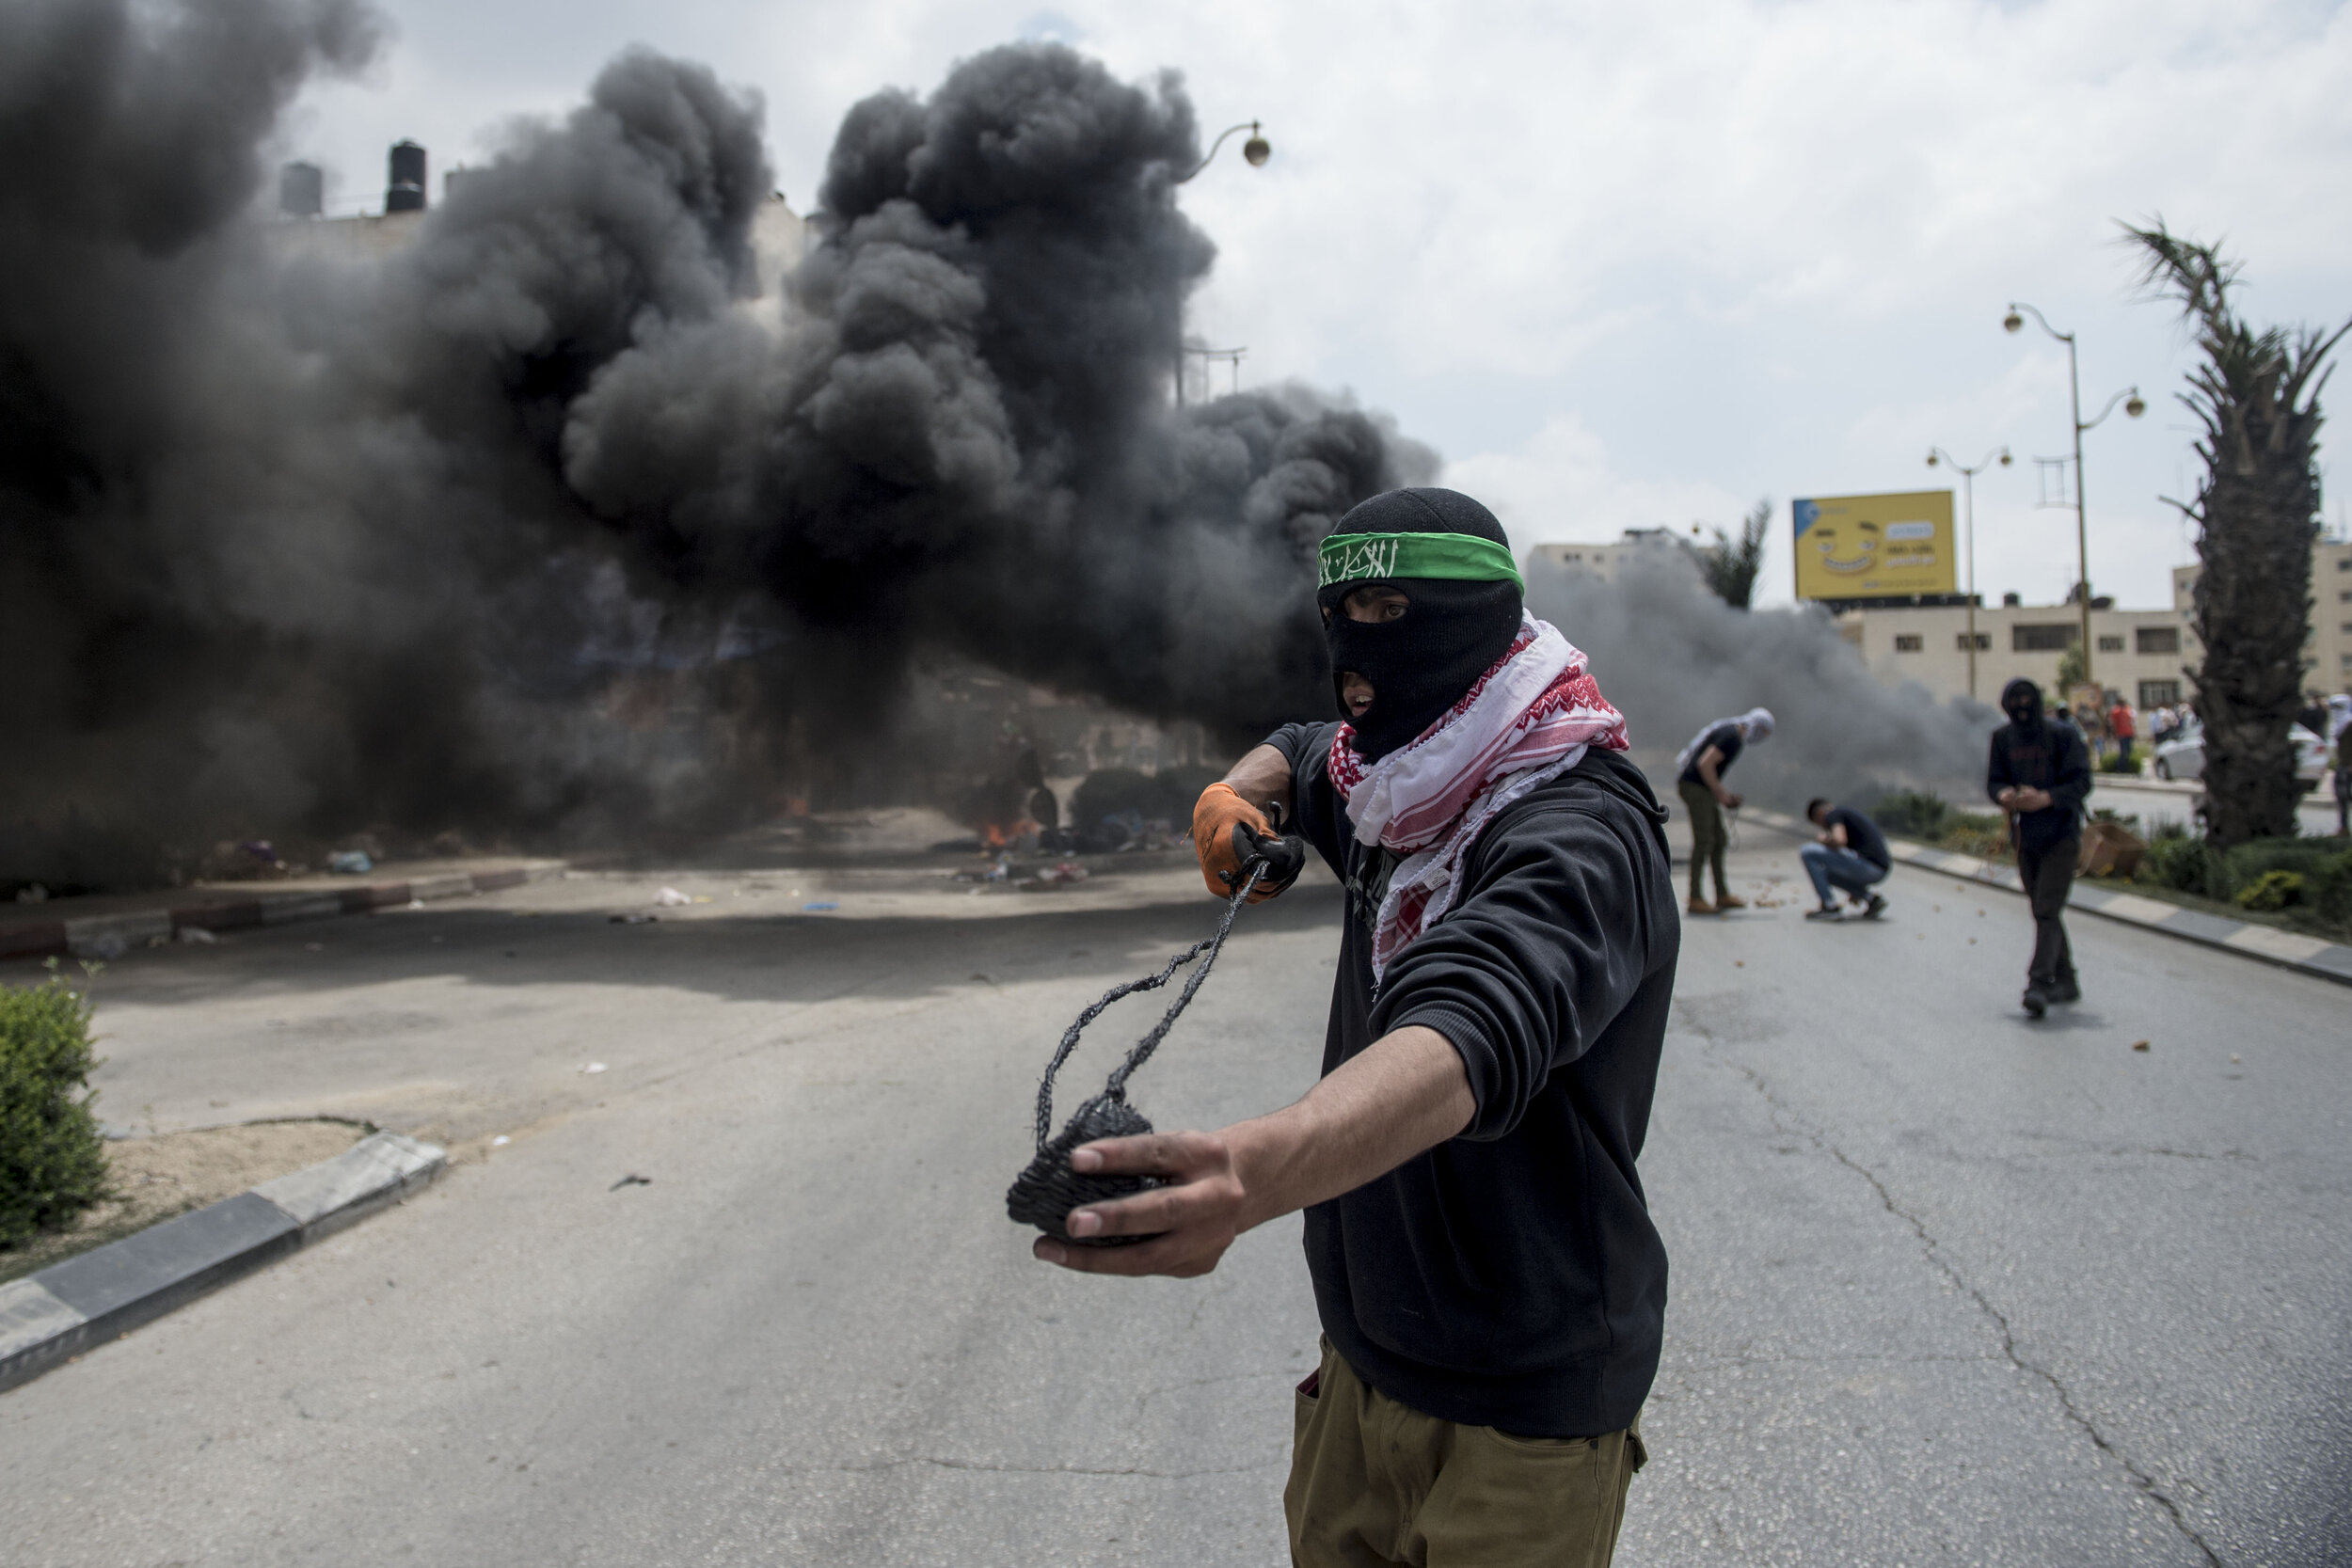  A Palestinian protester readies a rock in his sling during heavy clashes at Beit-El on Nakba Day. Nakba Day is the Palestinian Day of mourning and is also called ‘Day of the Tragedy’ as it commemorates the day in which the West Bank was annexed and 